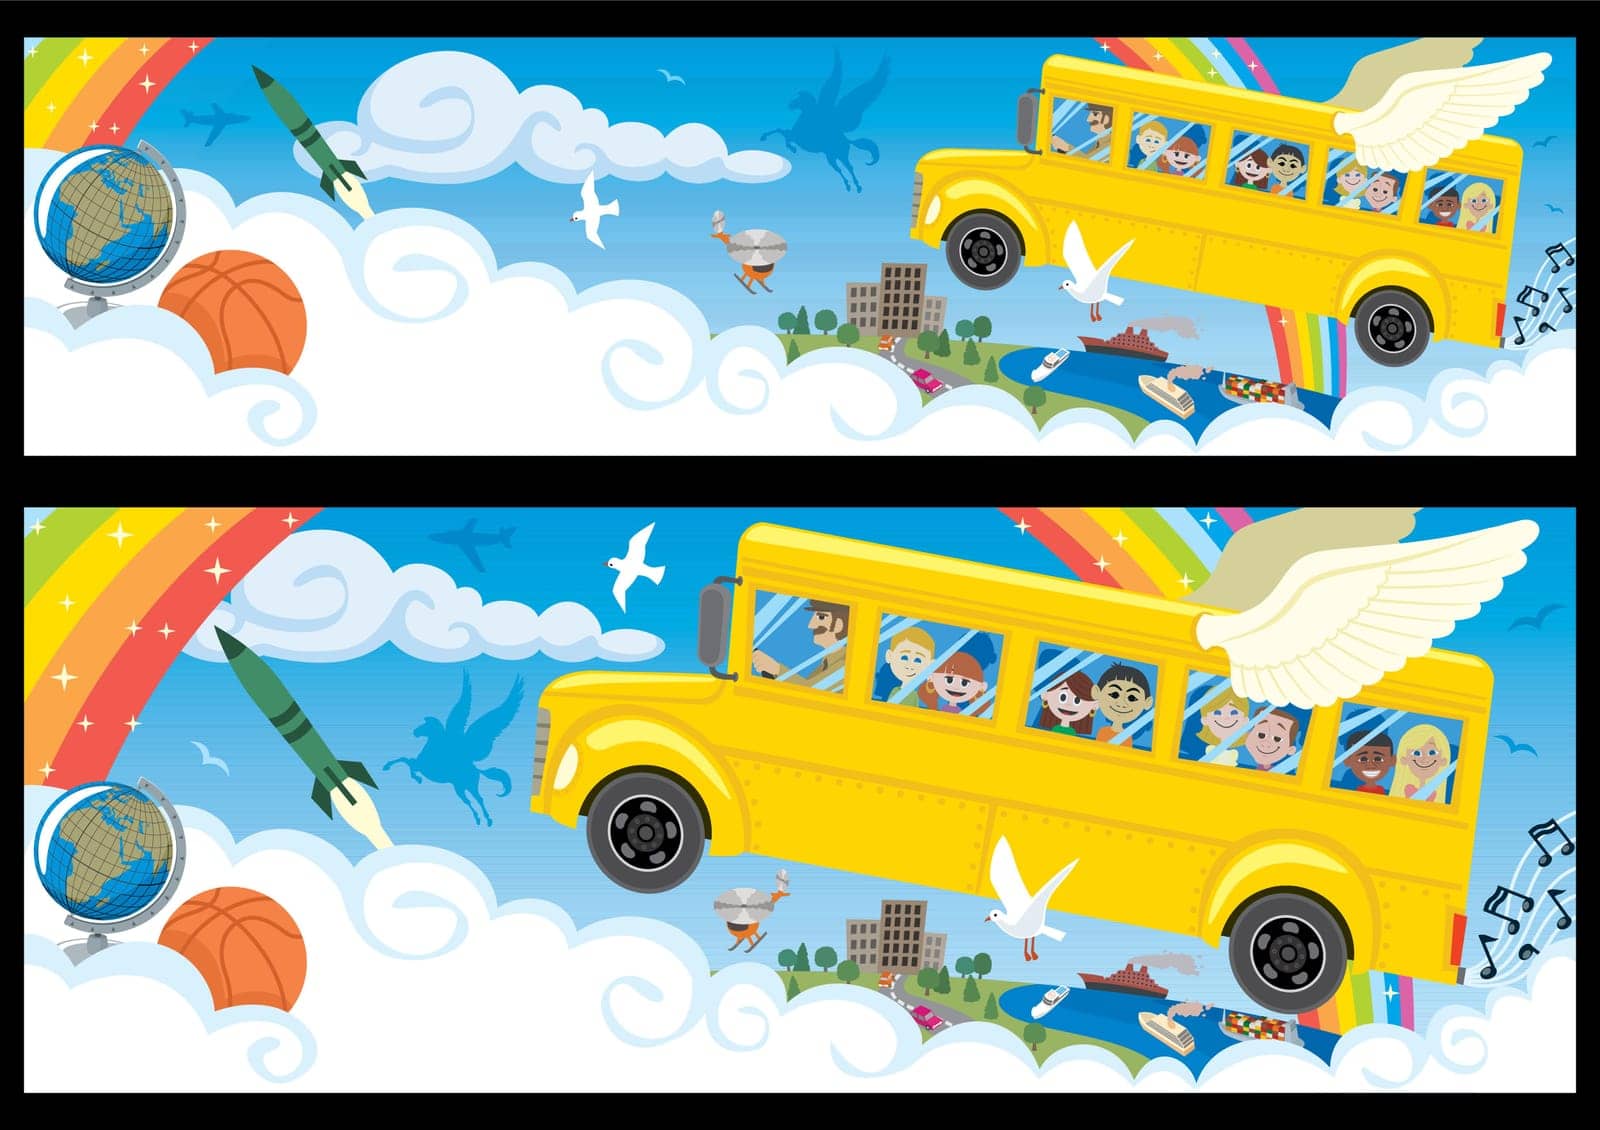 Cartoon banner in two versions differing by proportions. 
You can extend the white part of the clouds downwards as much as you need. 
